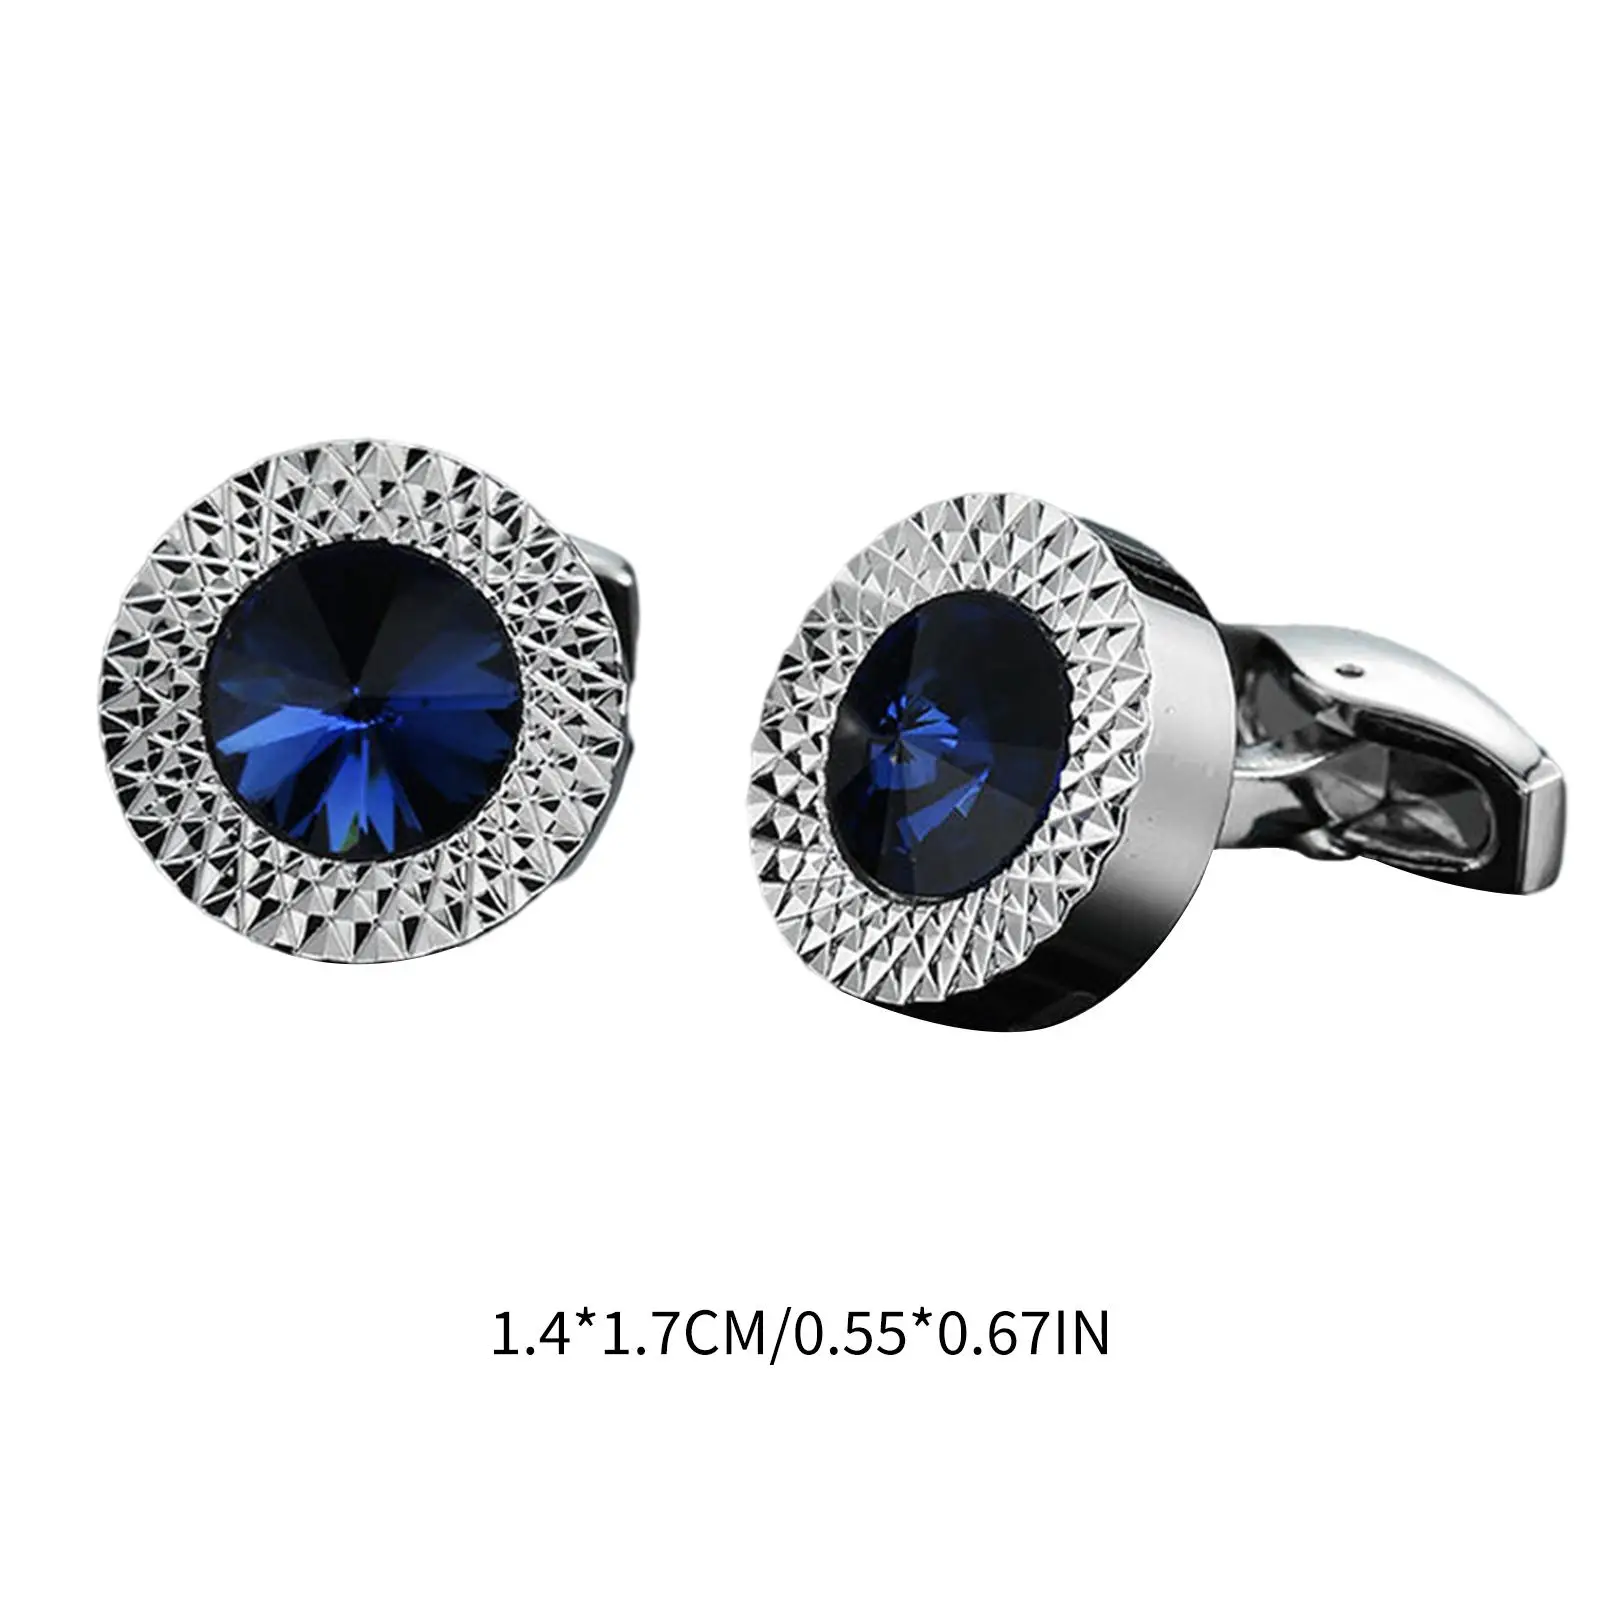 1 Pair Classy Stylish Shirt Cuff Links Crystal  Suit Accessories for Party